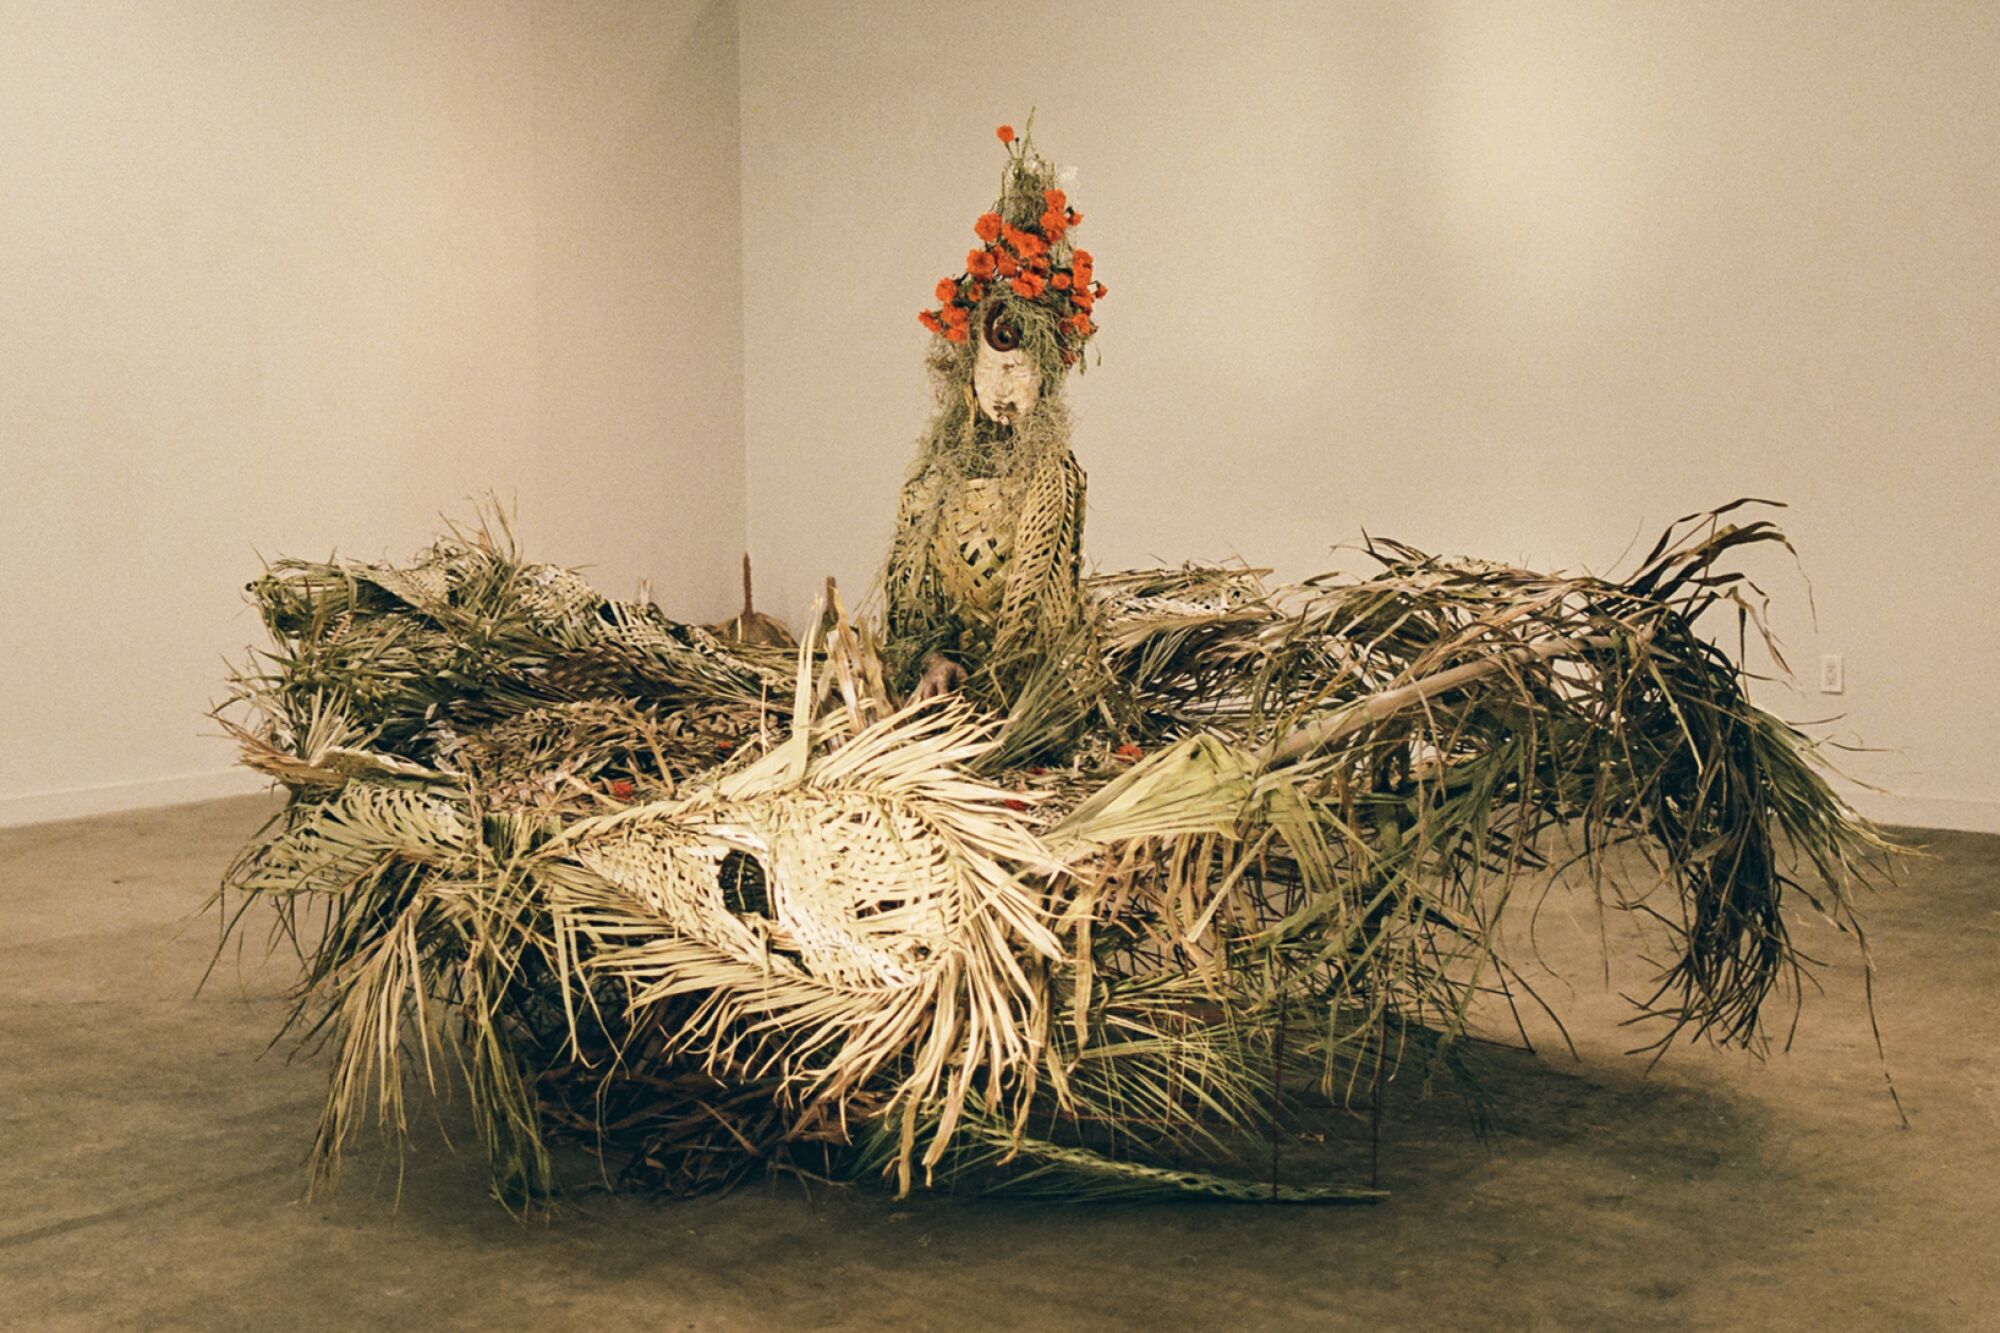 A whirlpool of palm fronds stands starkly in the center of Murmurs gallery, as a sculpture of Maria Maea’s mother emerges.